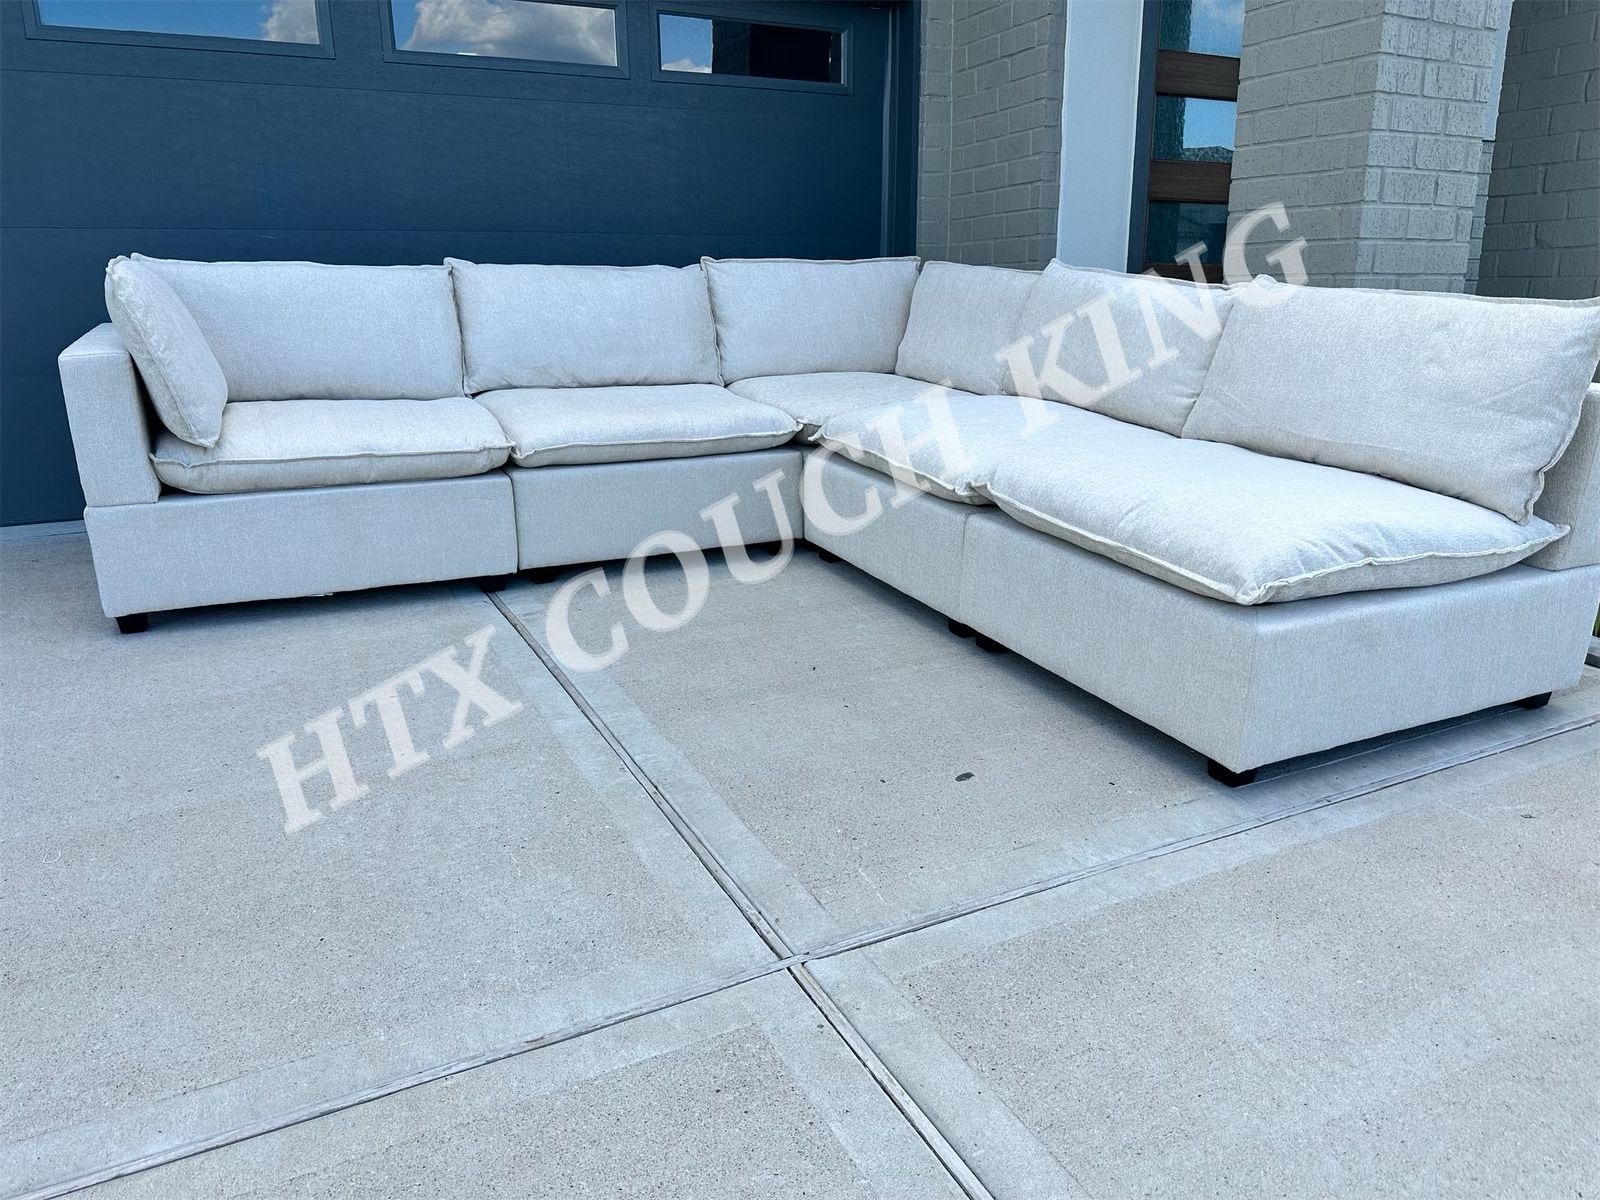 (New) Albany Park 5-Piece Kova Modular Sectional Cloud Couch - 🚚FREE DELIVERY